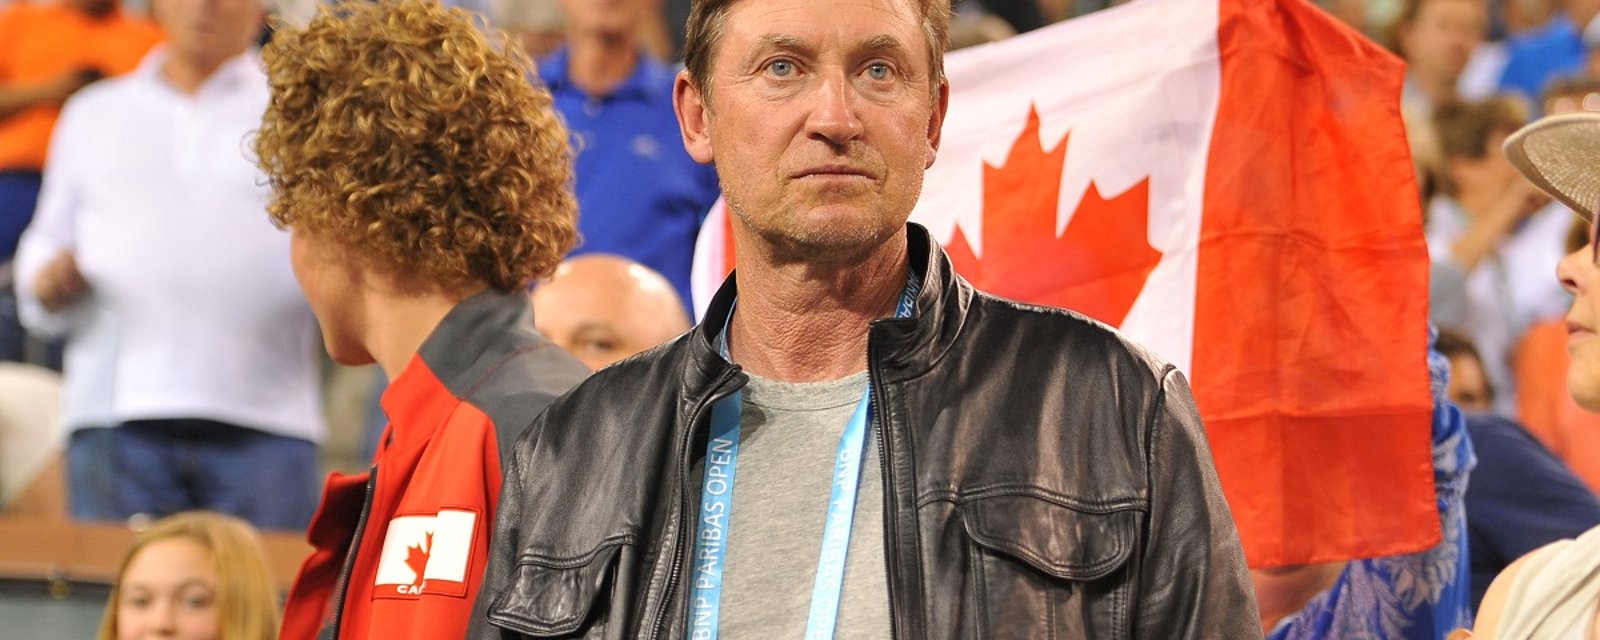 The Great One shares his thoughts on rumors of an All Canadian division.